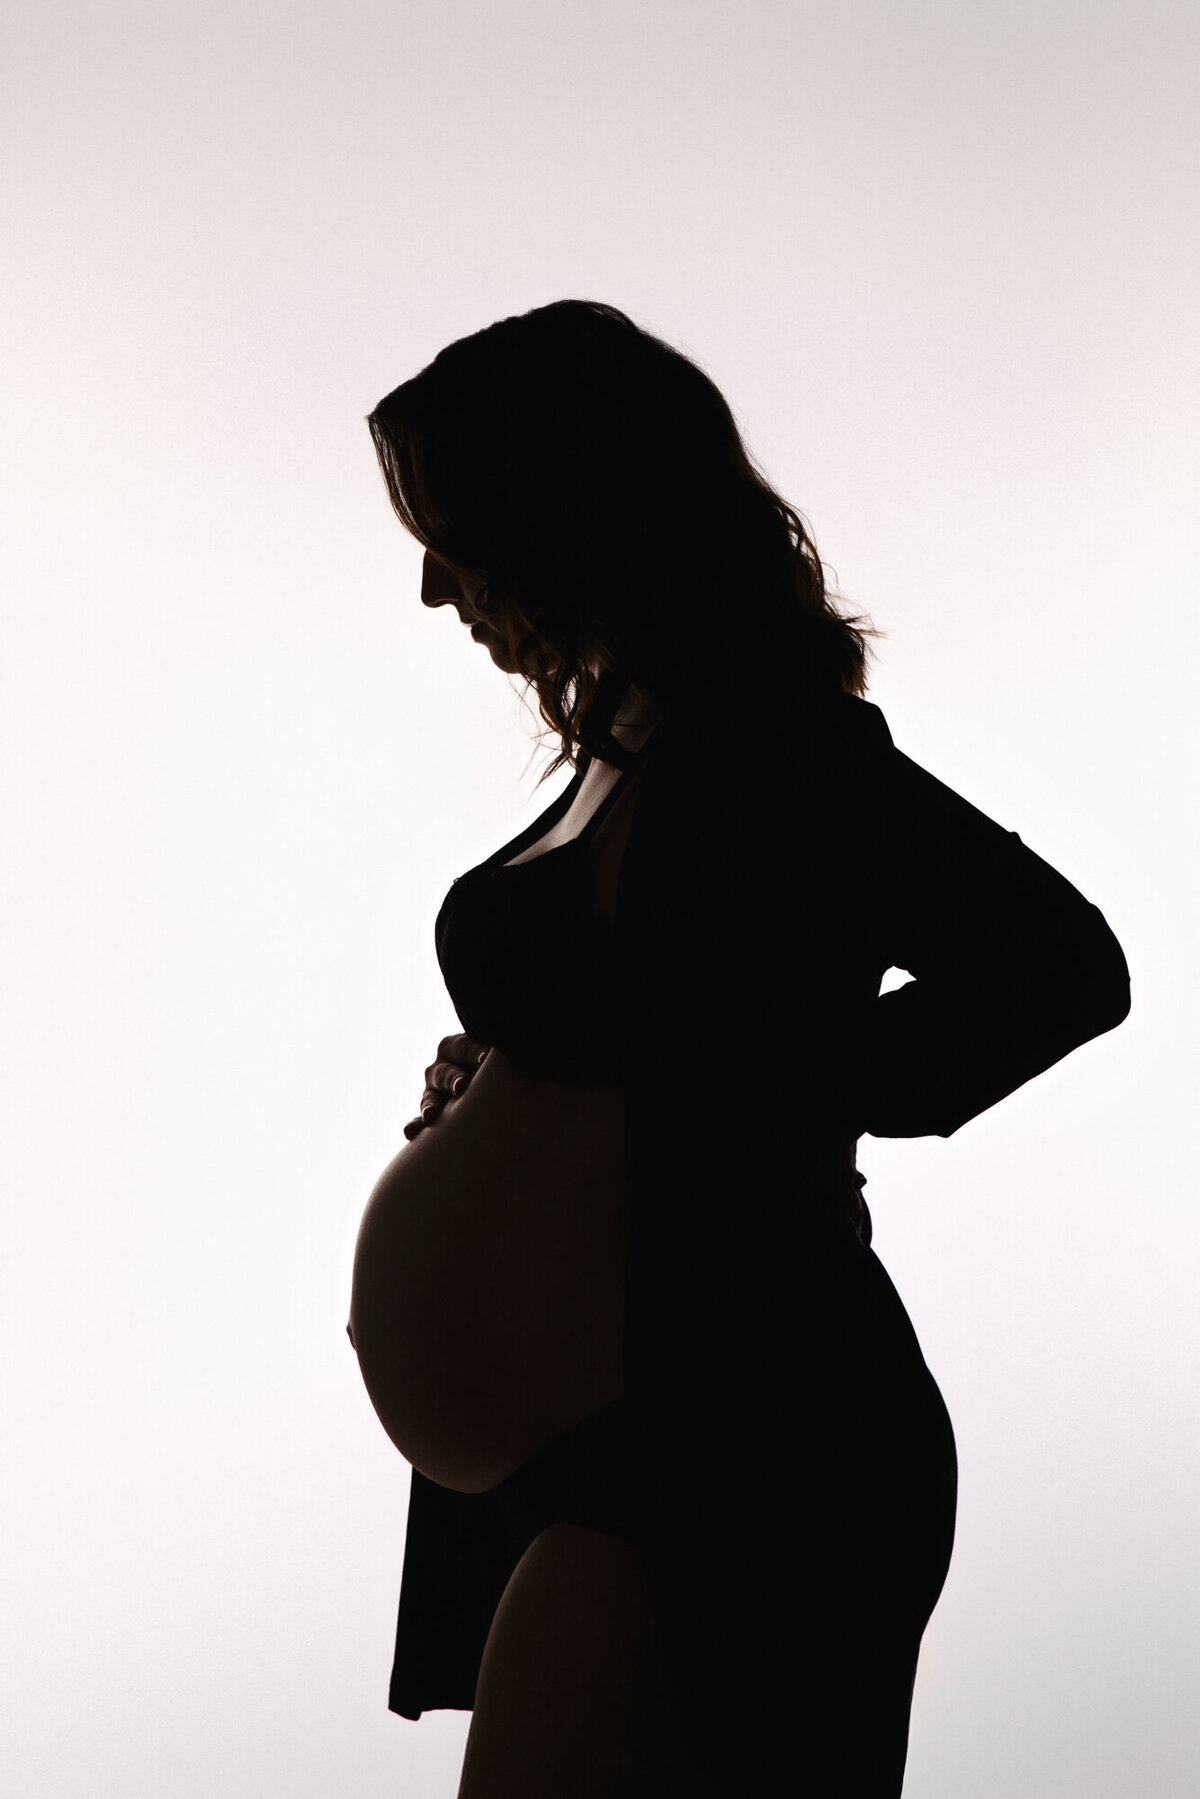 Silhouette of pregnant woman against a white background